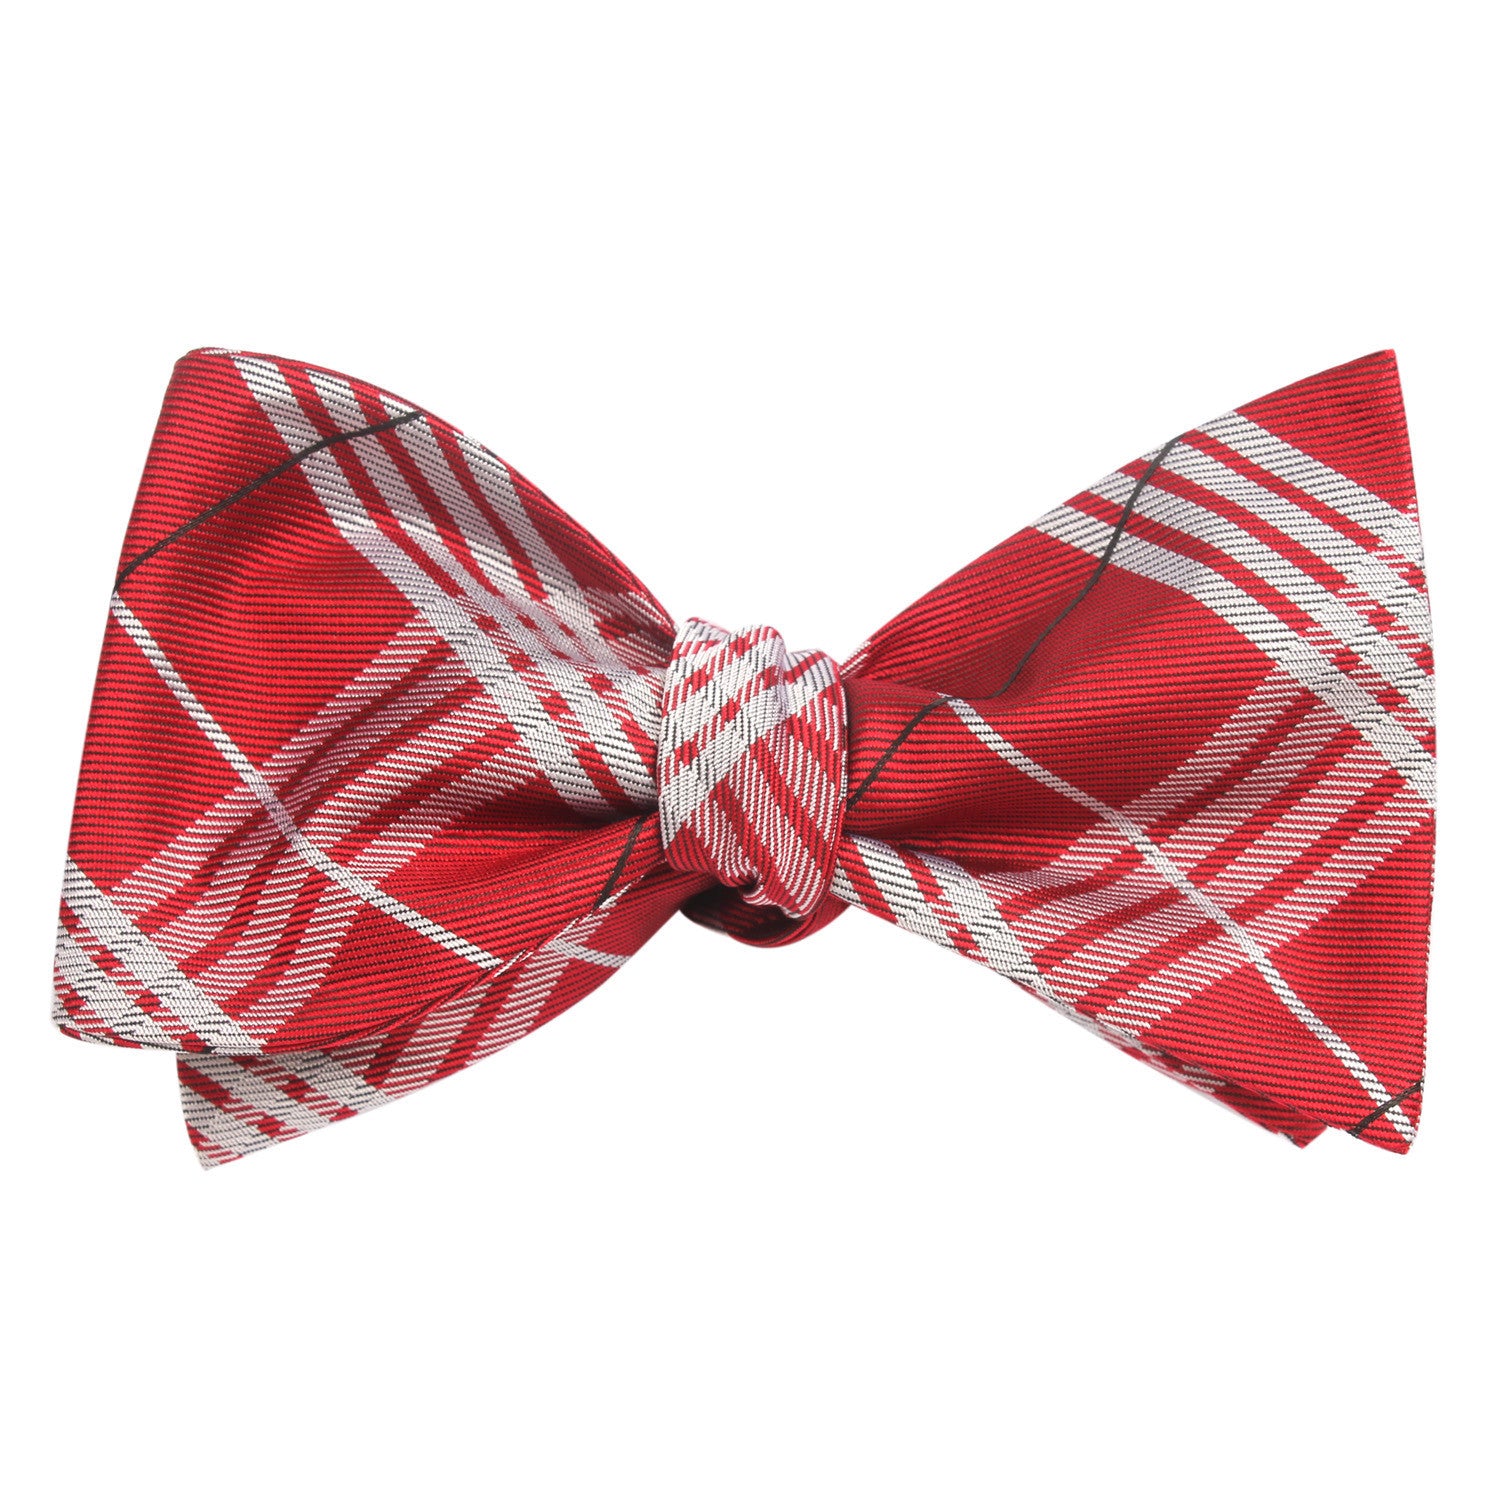 Scarlet Maroon with White Stripes Self Tie Bow Tie Self tied knot by OTAA